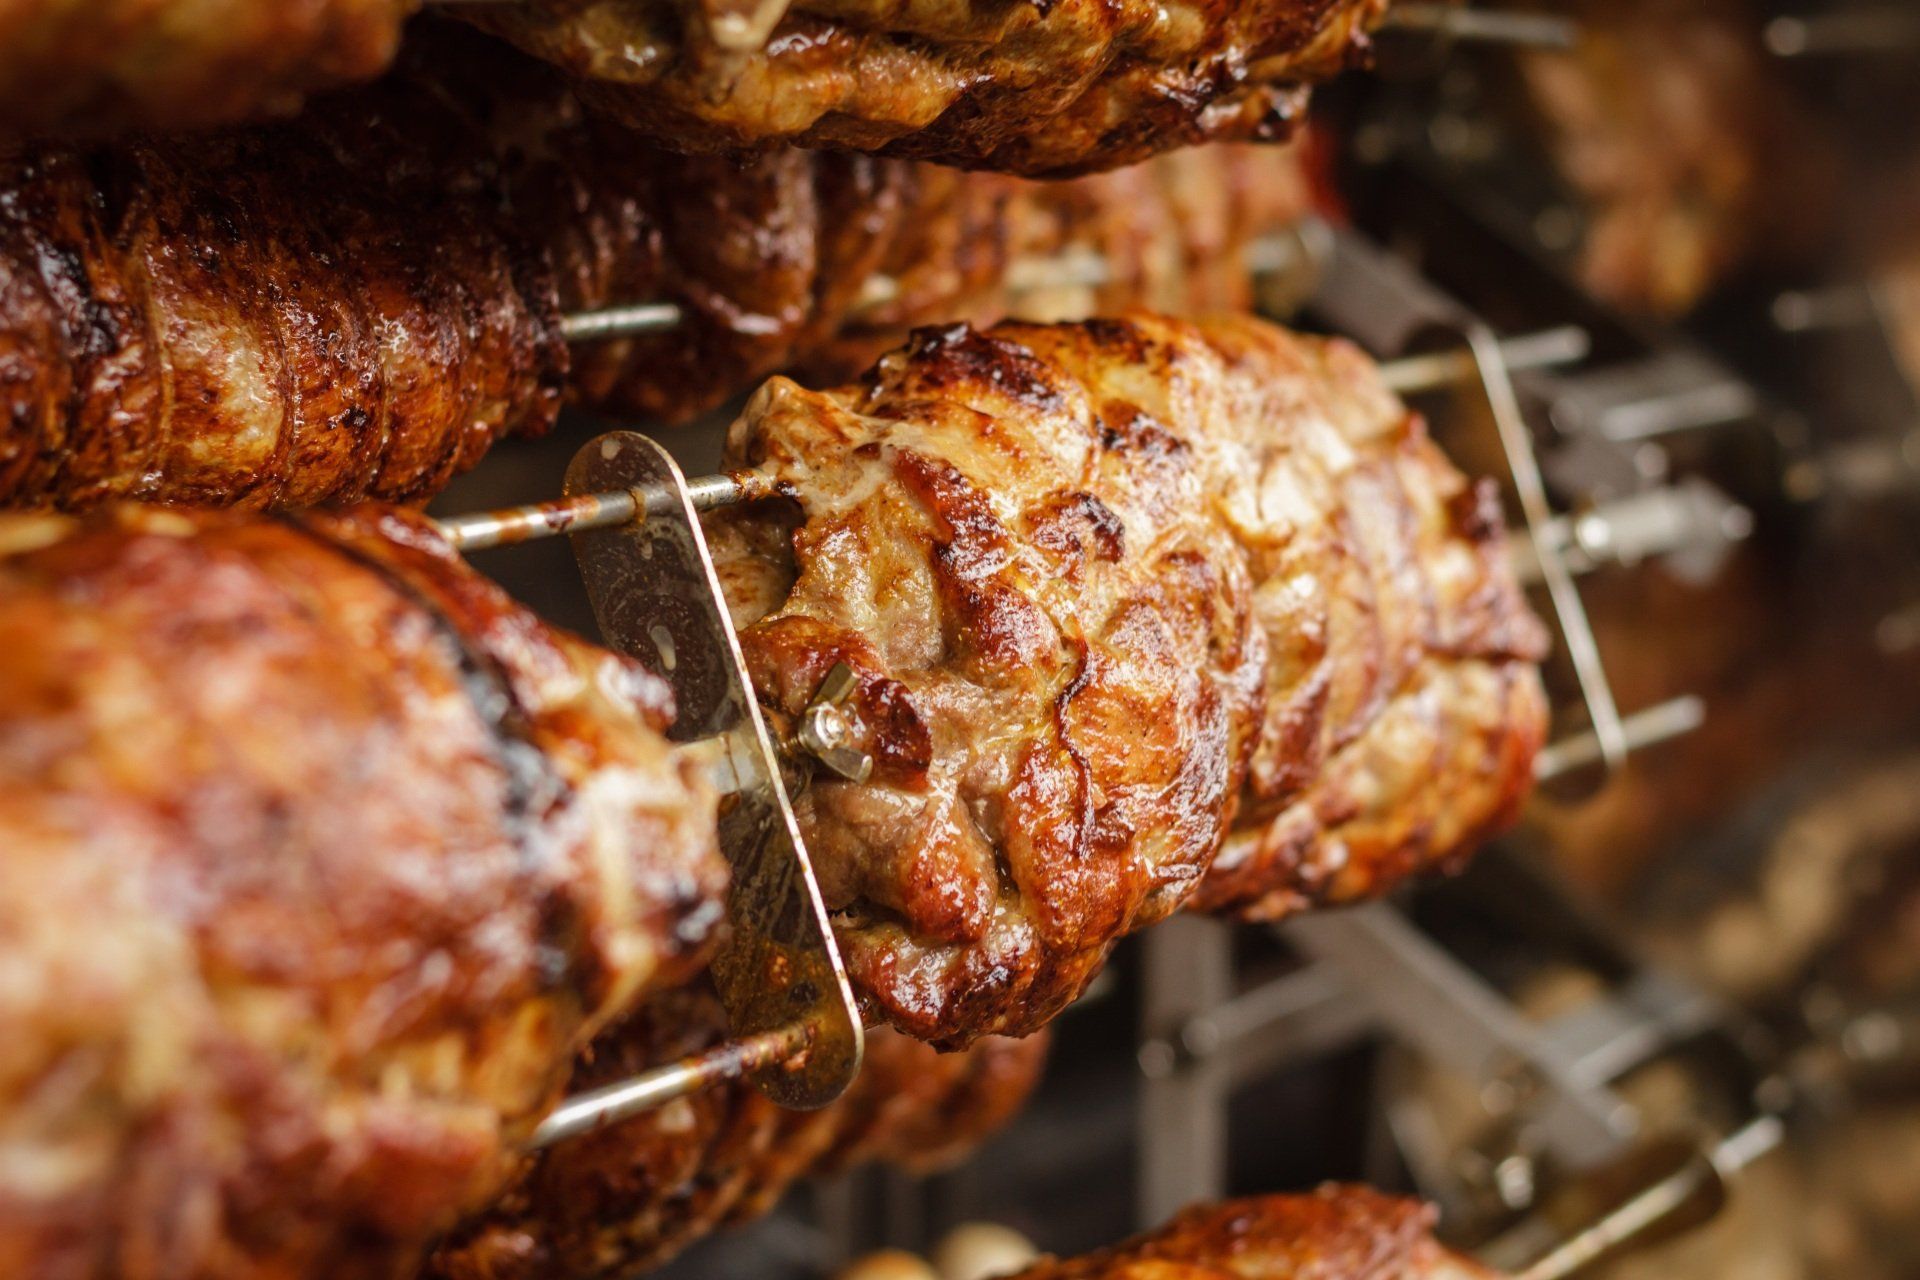 a close up of roasted chicken on skewers on a grill .